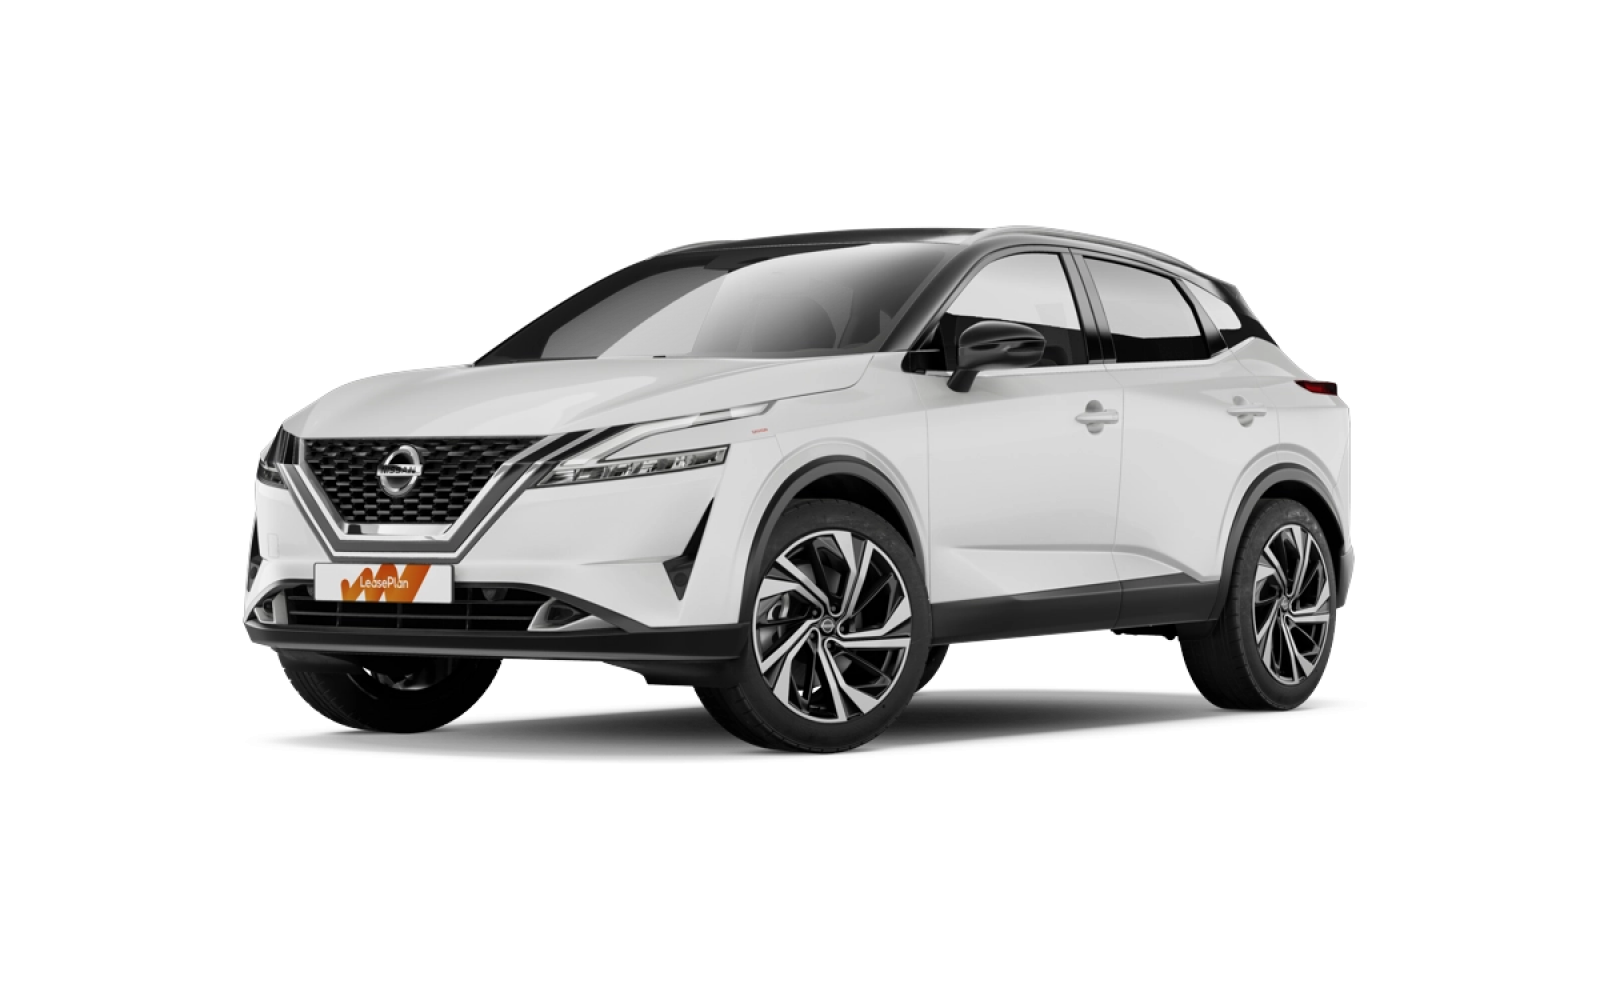 NISSAN Qashqai E-POWER 190 2WD N-Connecta large 2826 - operativní leasing